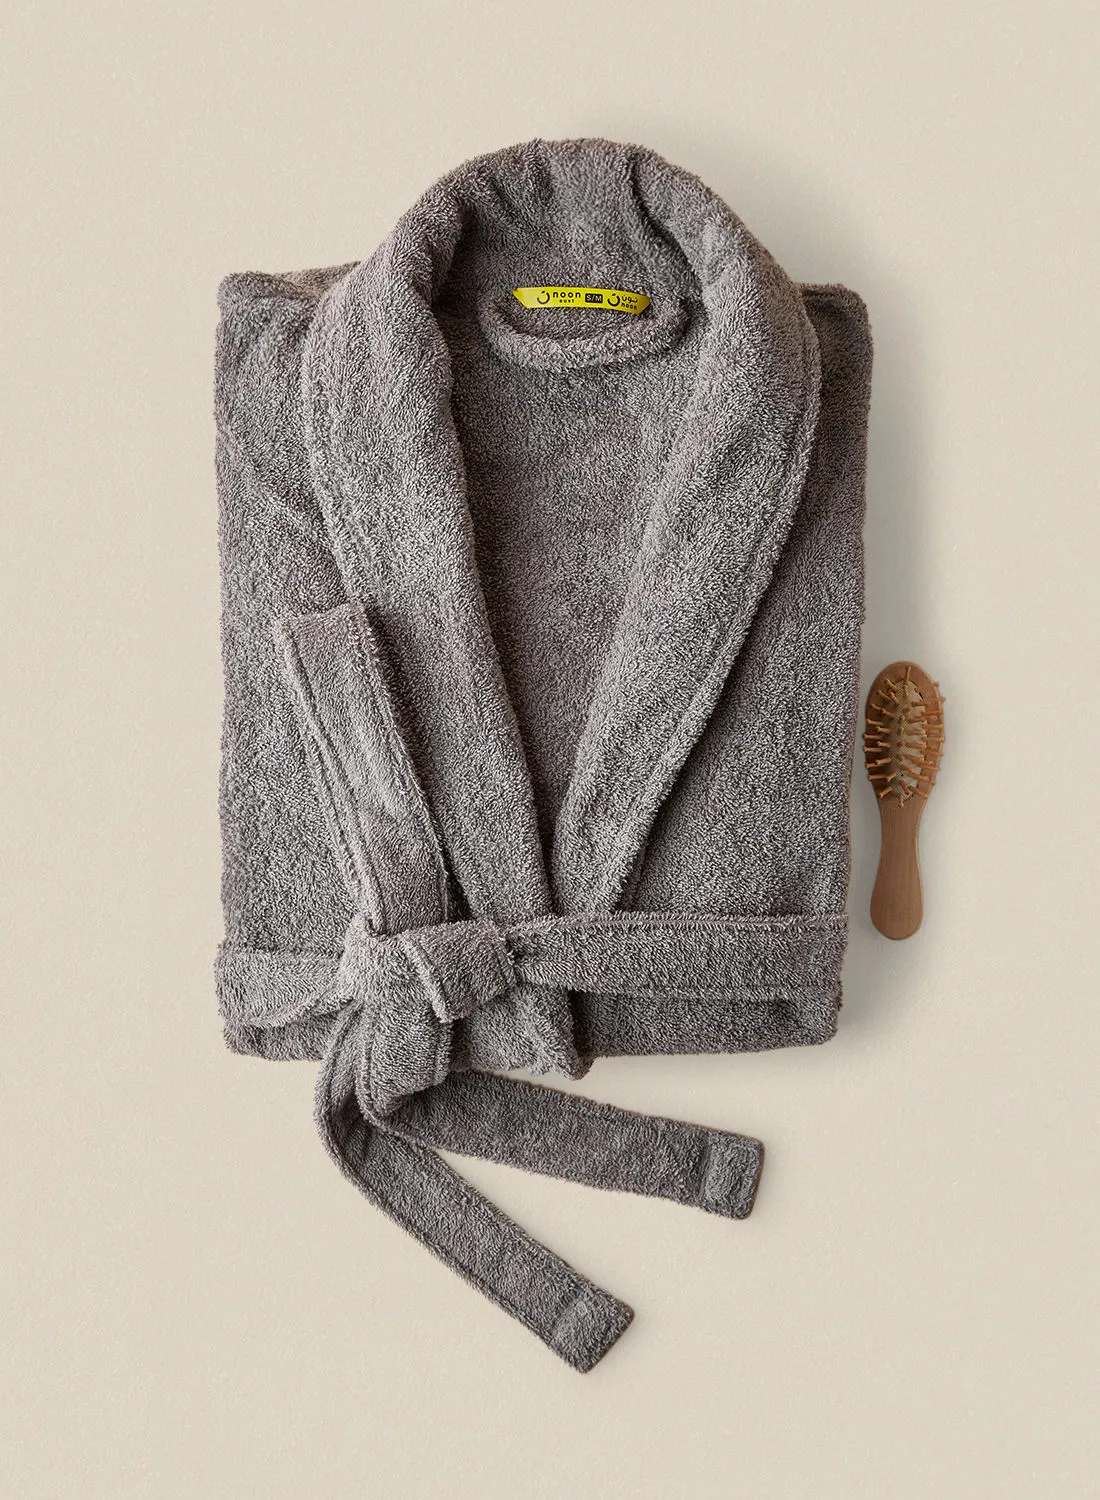 noon east Bathrobe - 380 GSM 100% Cotton Terry Silky Soft Spa Quality Comfort - Shawl Collar & Pocket - Mountain Grey Color - 1 Piece